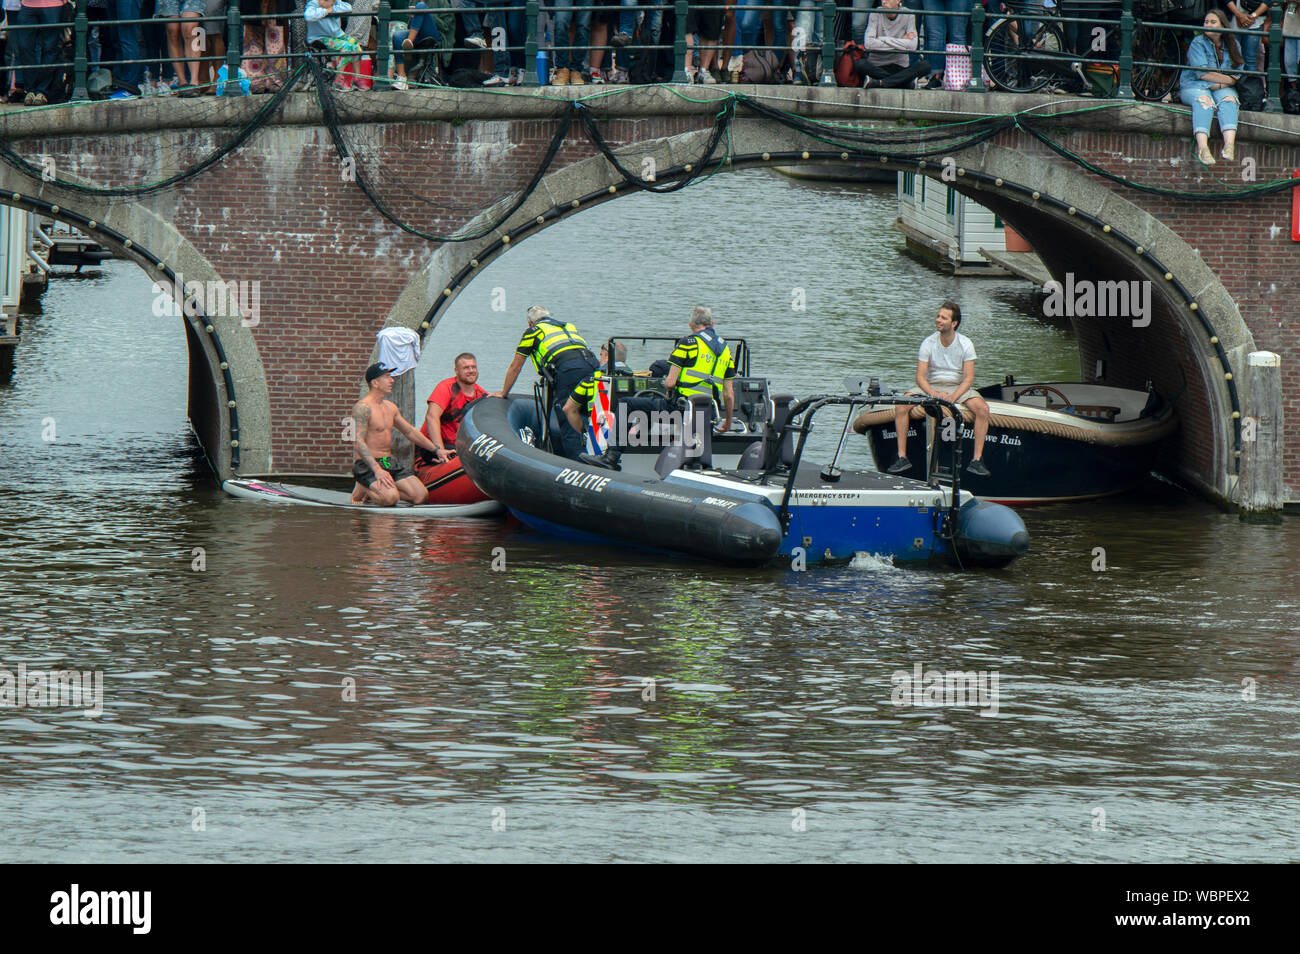 Police At Work On The Water During The Gay Pride Amsterdam The Netherlands 2019 Stock Photo